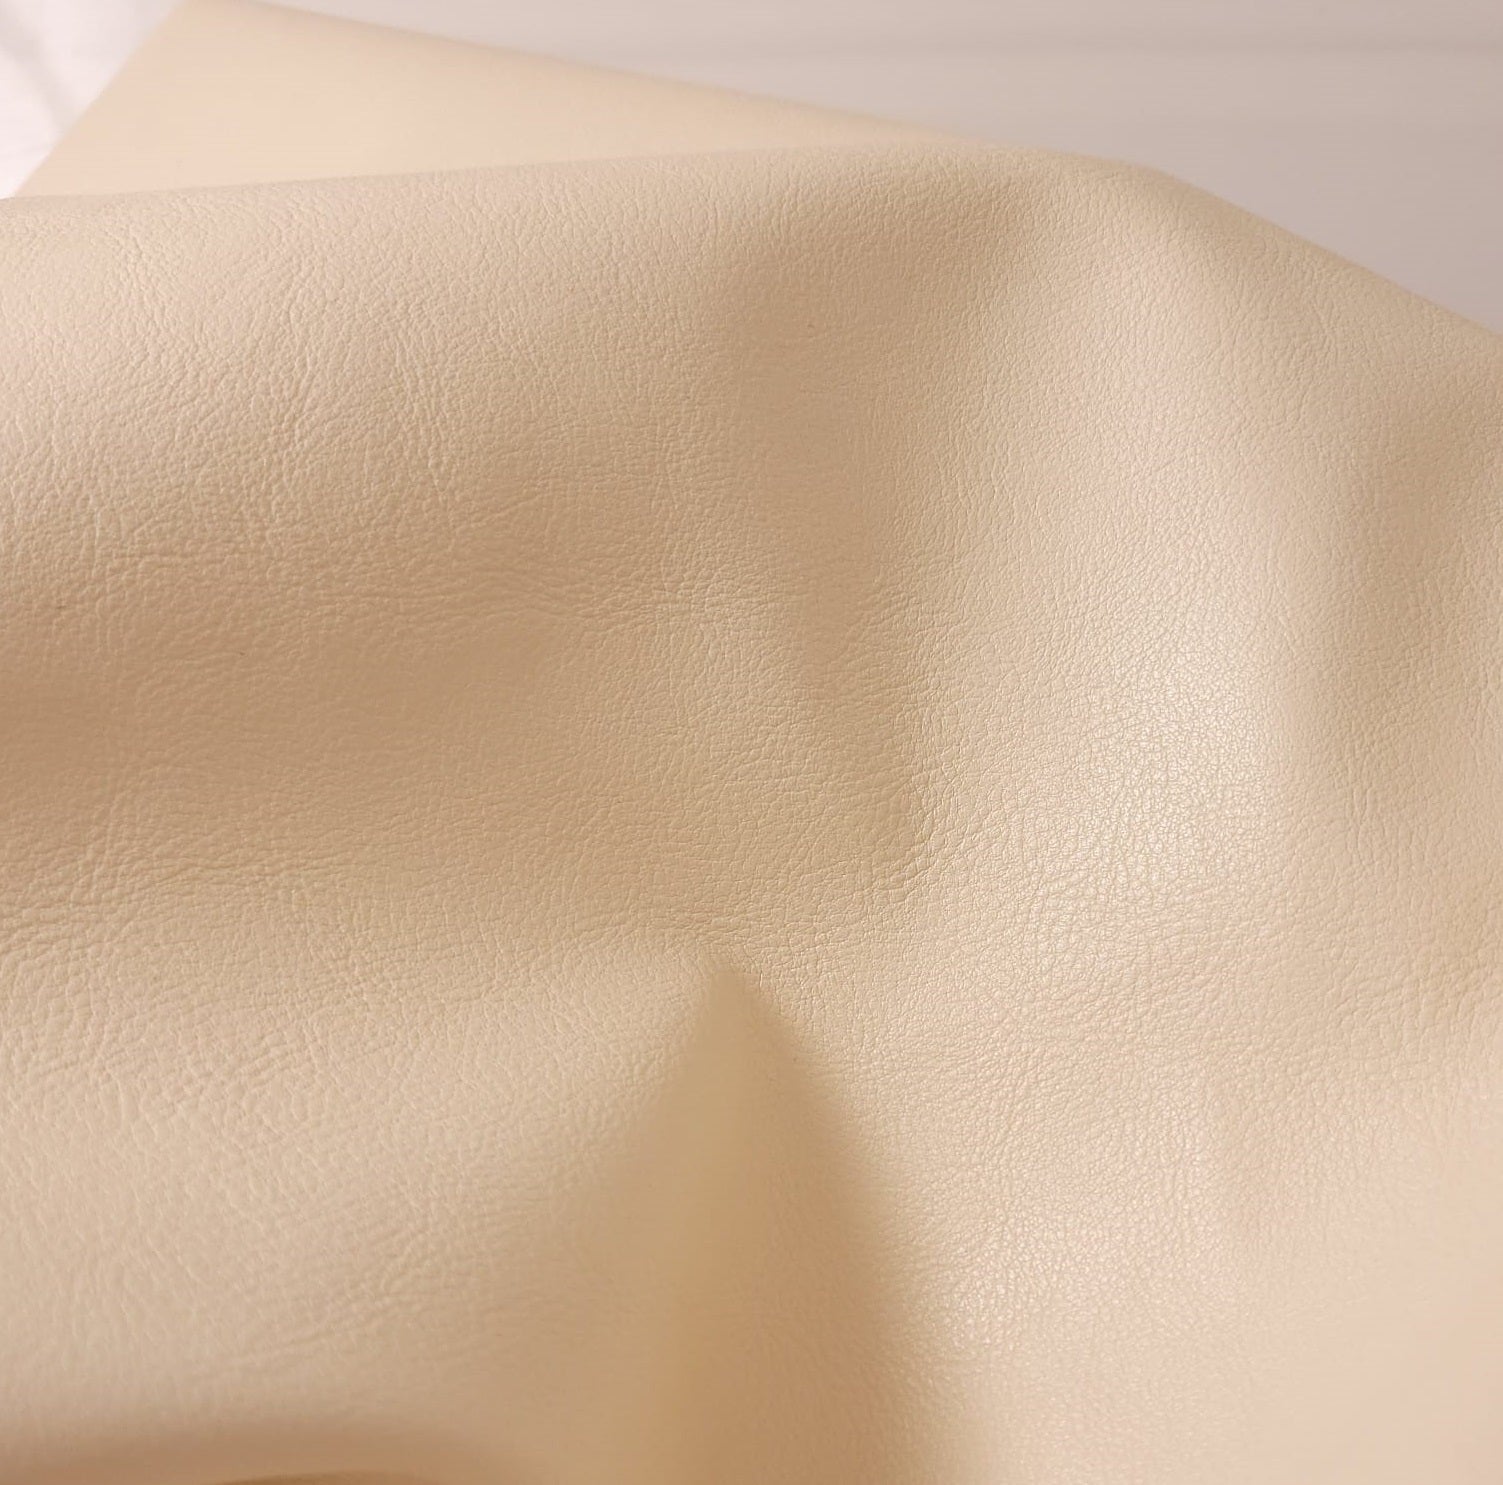  Faux vegan leather by the yard sheets distressed leather fabric for upholstery 30,000 Double Rubs vinyl sheets nappa leather crafts bookbinding books furniture fabrics uphilstery fuax material pu pleather faiux learher cruelty free nappa seat bone off white cream